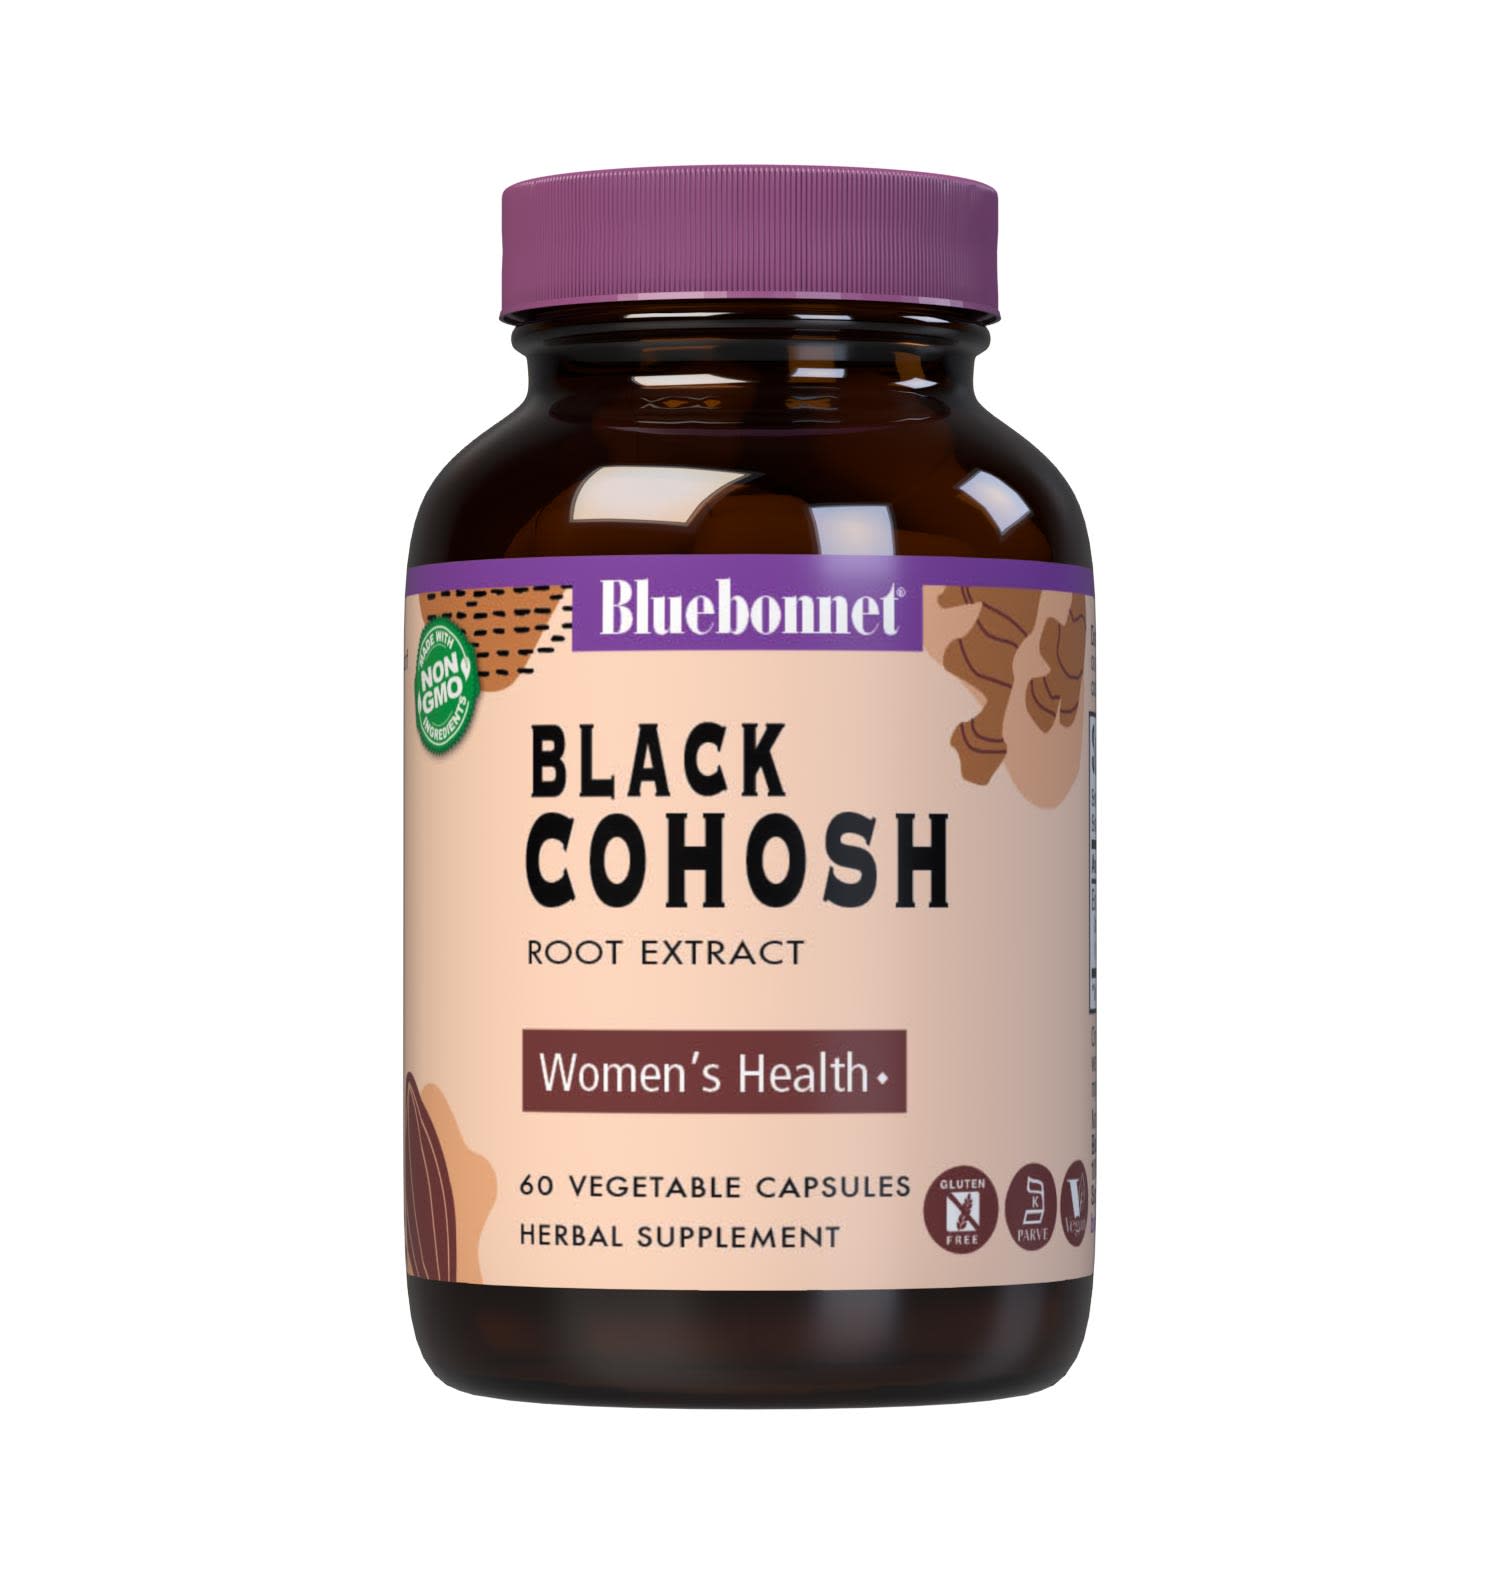 Bluebonnet’s Black Cohosh Root Extract 60 Vegetable Capsules are formulated with a full spectrum extract of black cohosh root to help support women's health. A clean and gentle water-based extraction method is employed to capture annd preserve black cohosh's most valuable components. #size_60 count